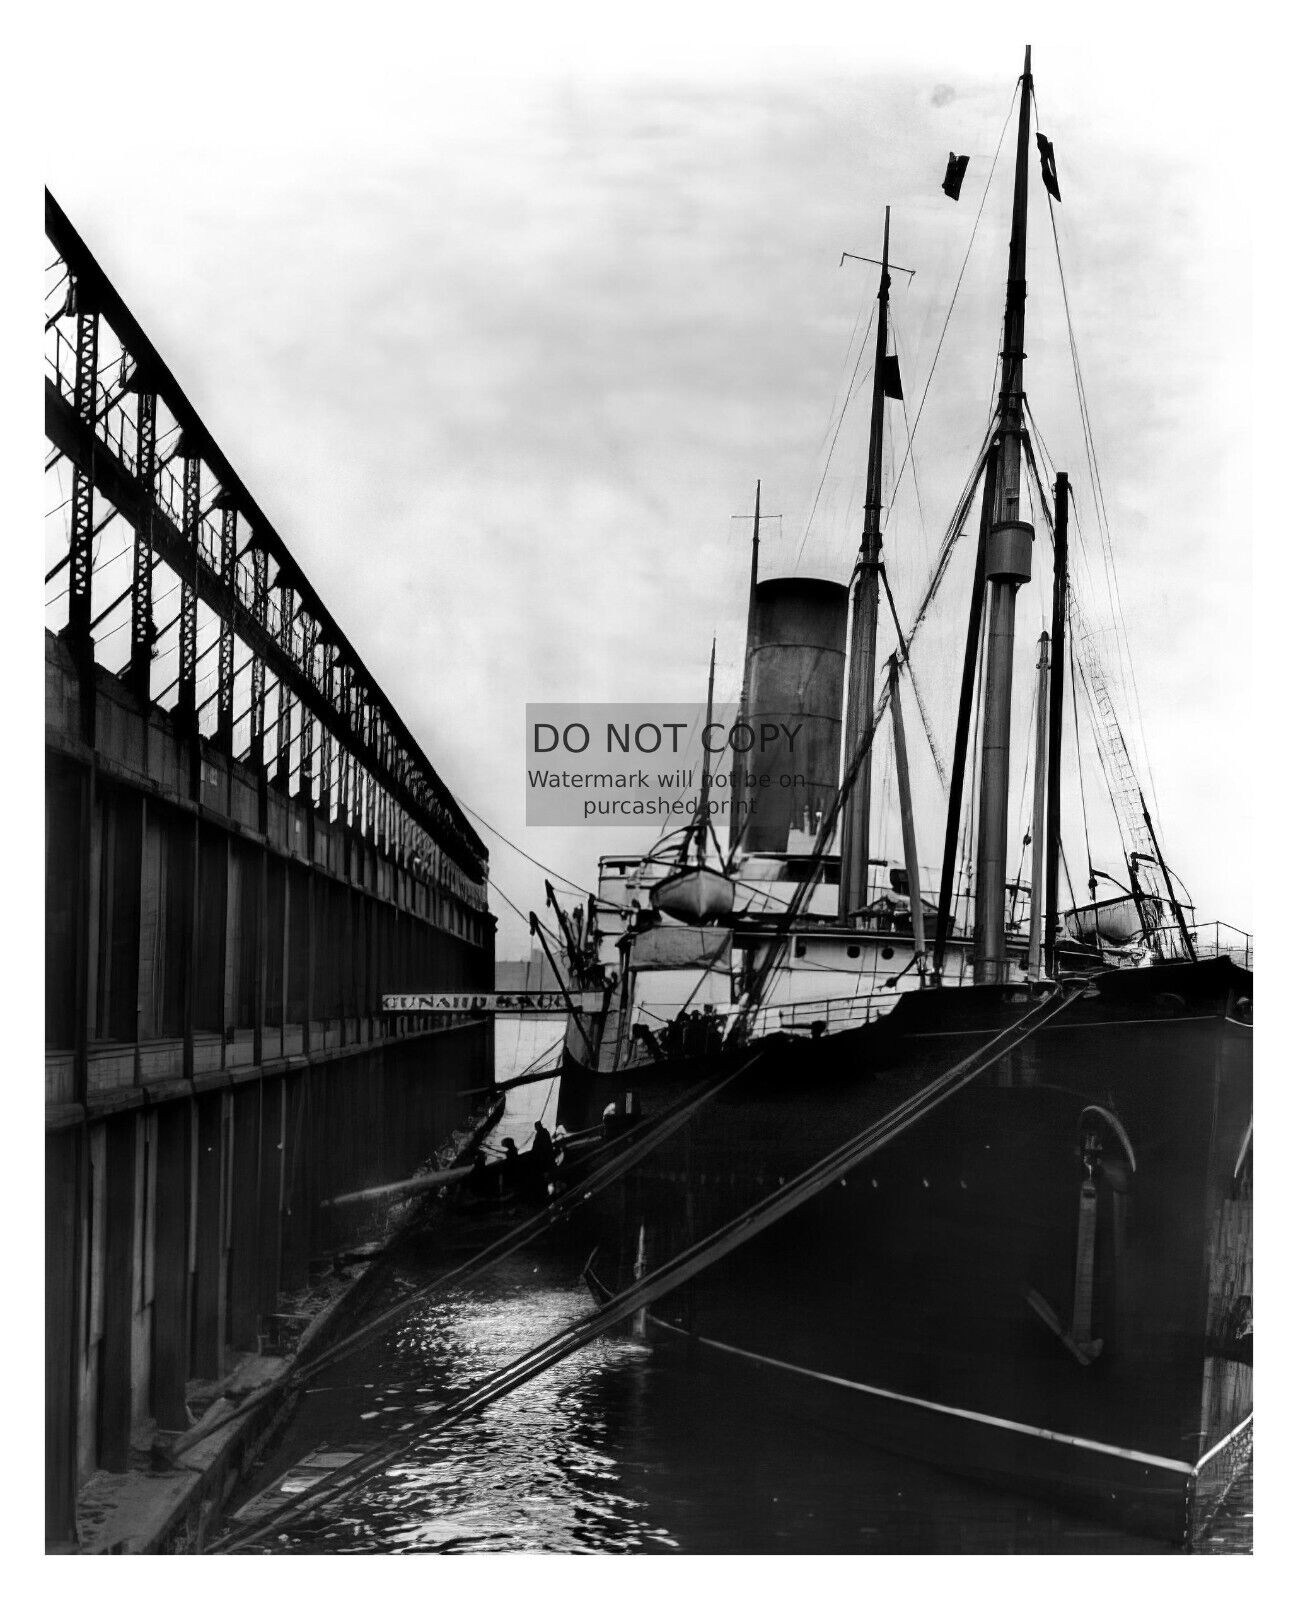 SS CARPATHIA RESCUE SHIP AT DOCK AFTER RMS TITANIC DISASTER TRAGEDY 8X10 PHOTO